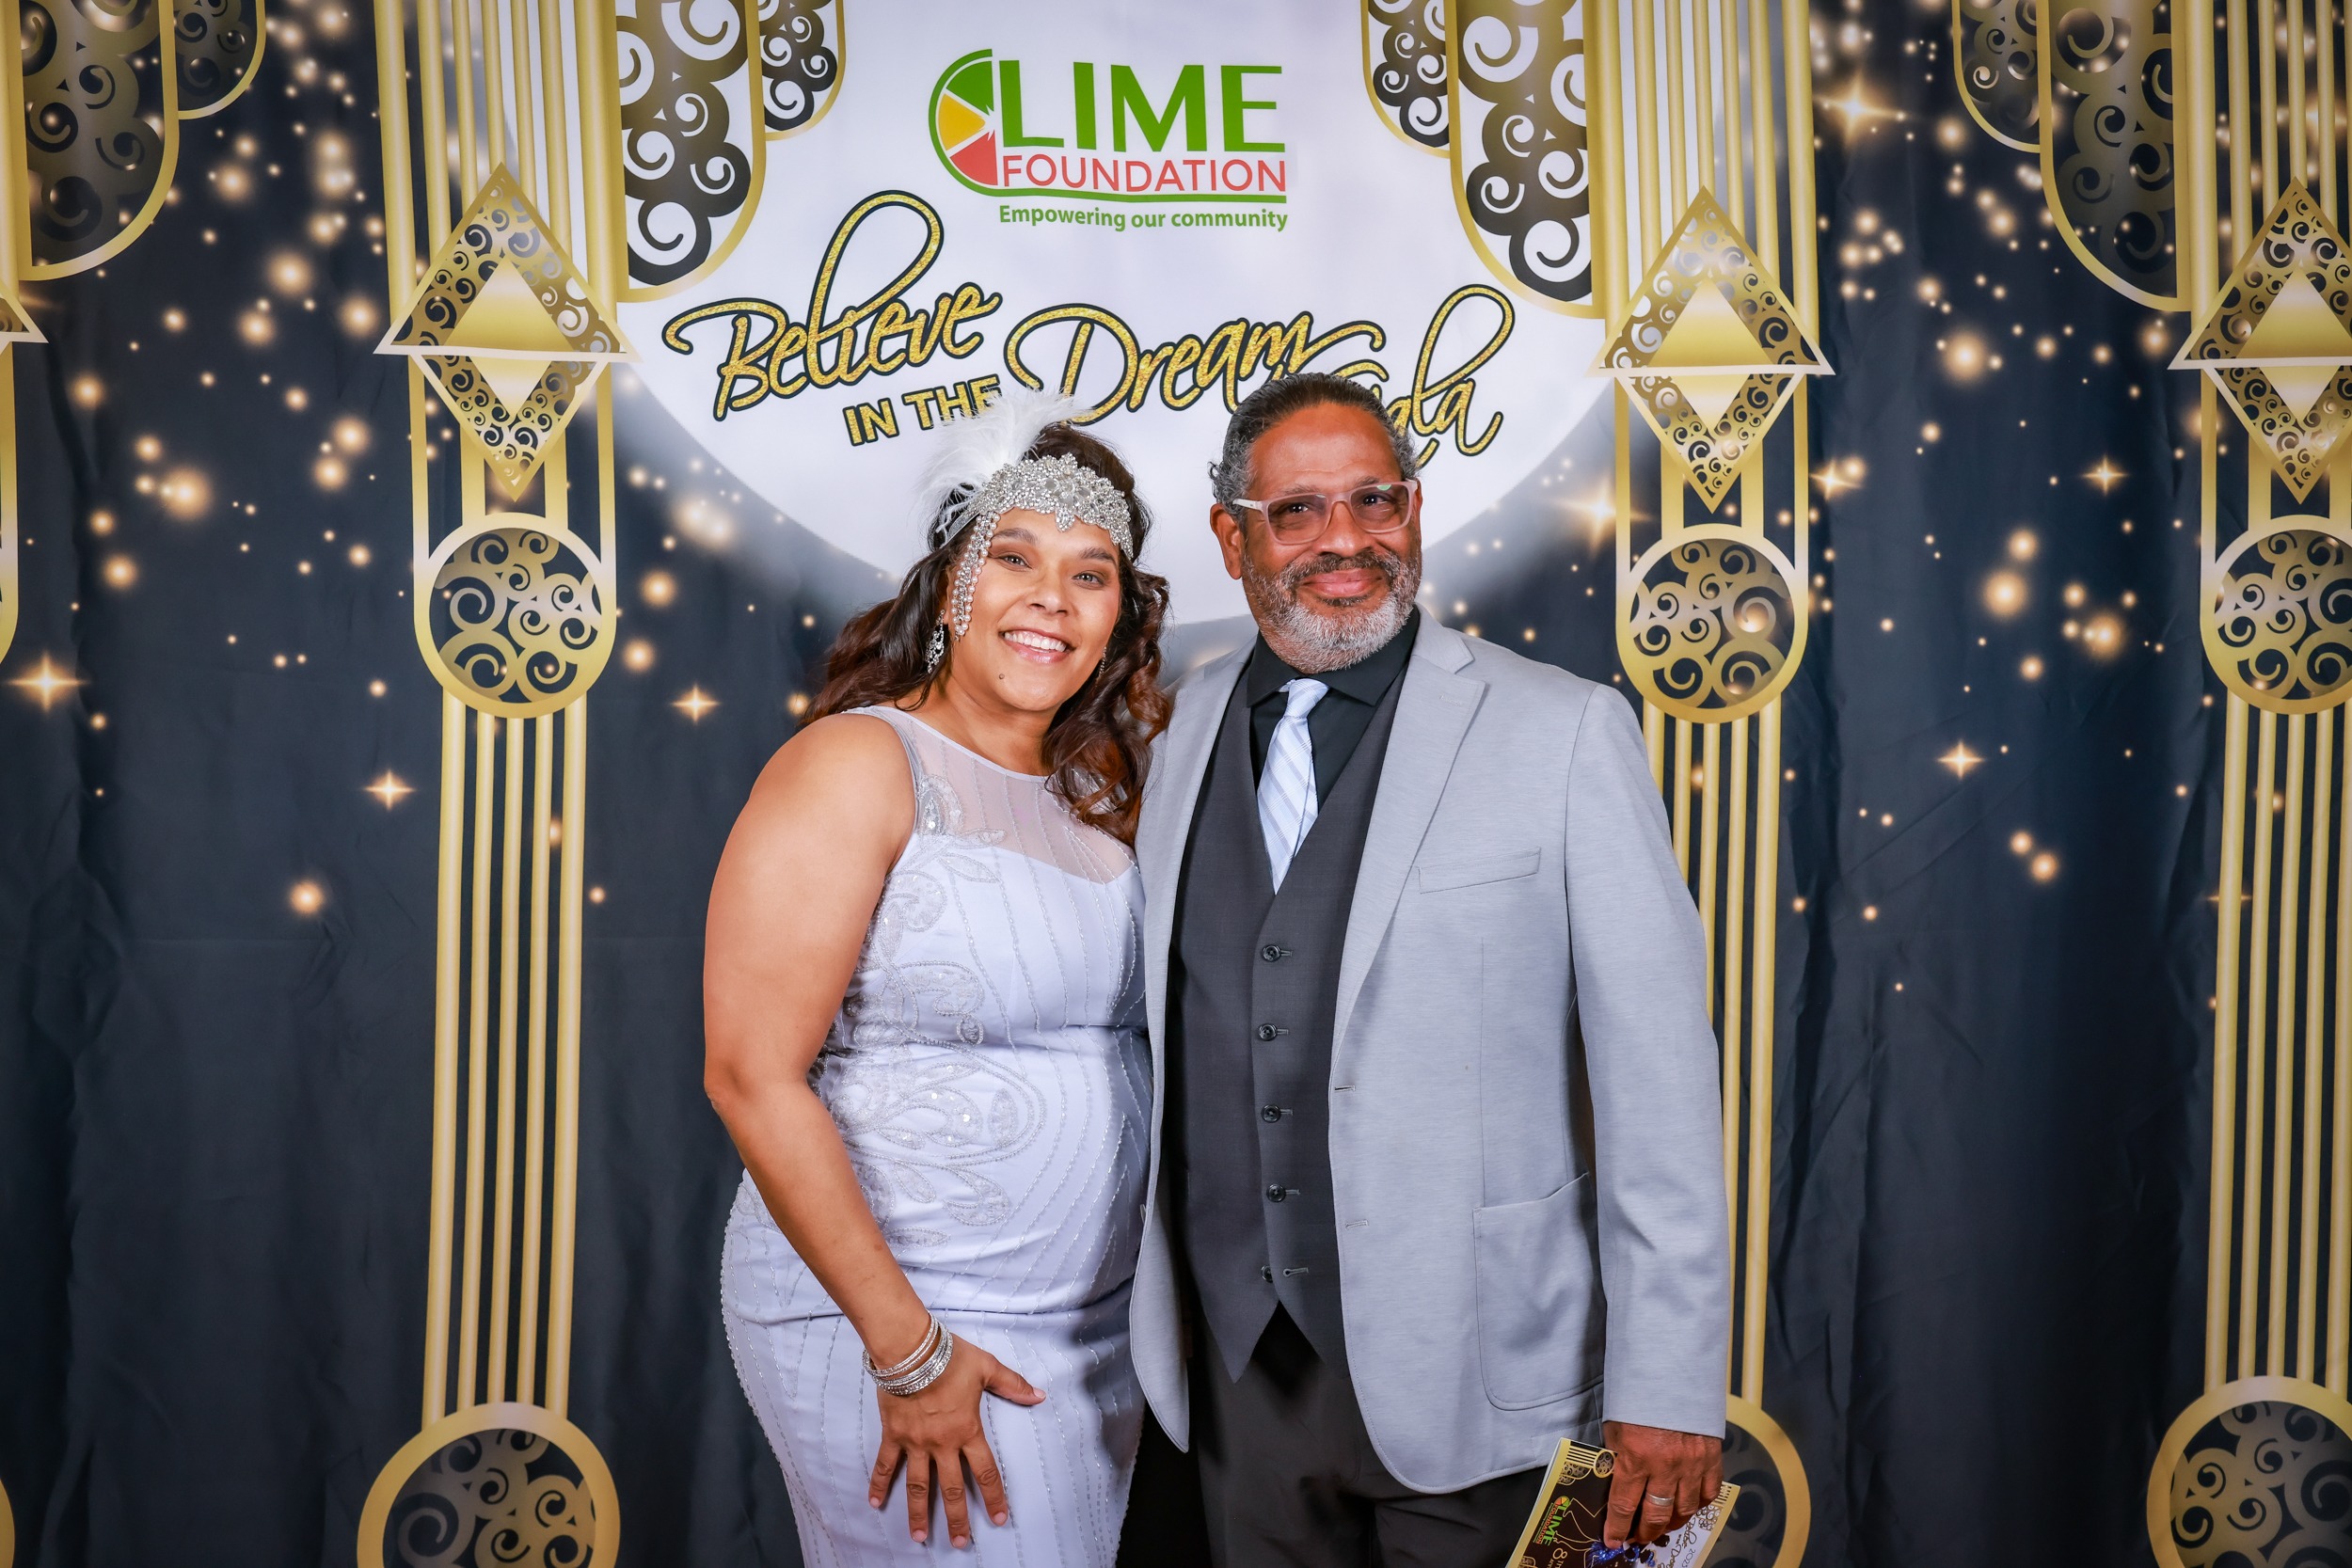 A man and woman posing for a photo at a party hosted by The LIME Foundation of Santa Rosa, a Sonoma County Non-Profit Organization.